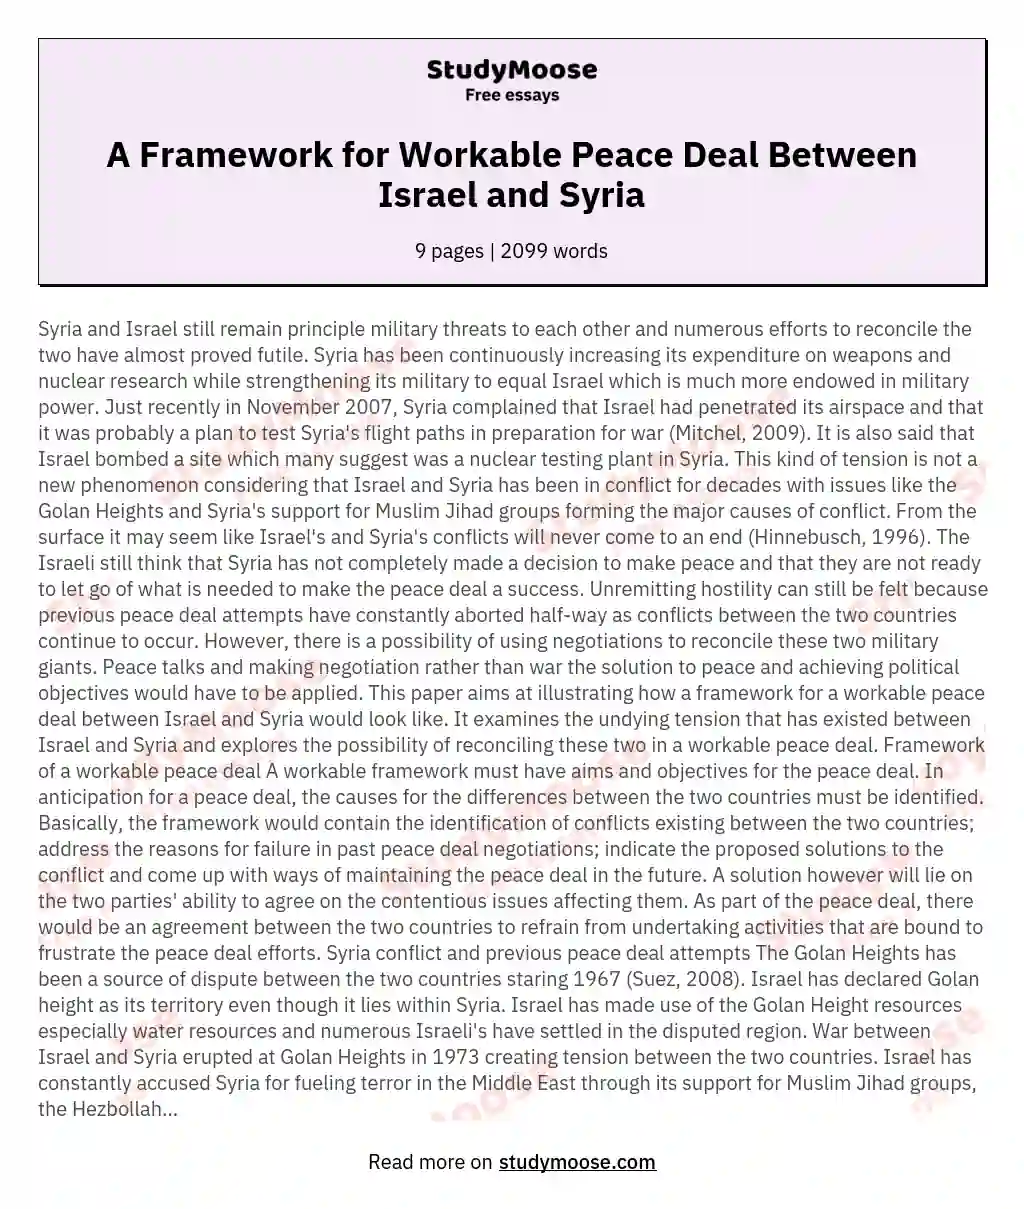 A Framework for Workable Peace Deal Between Israel and Syria